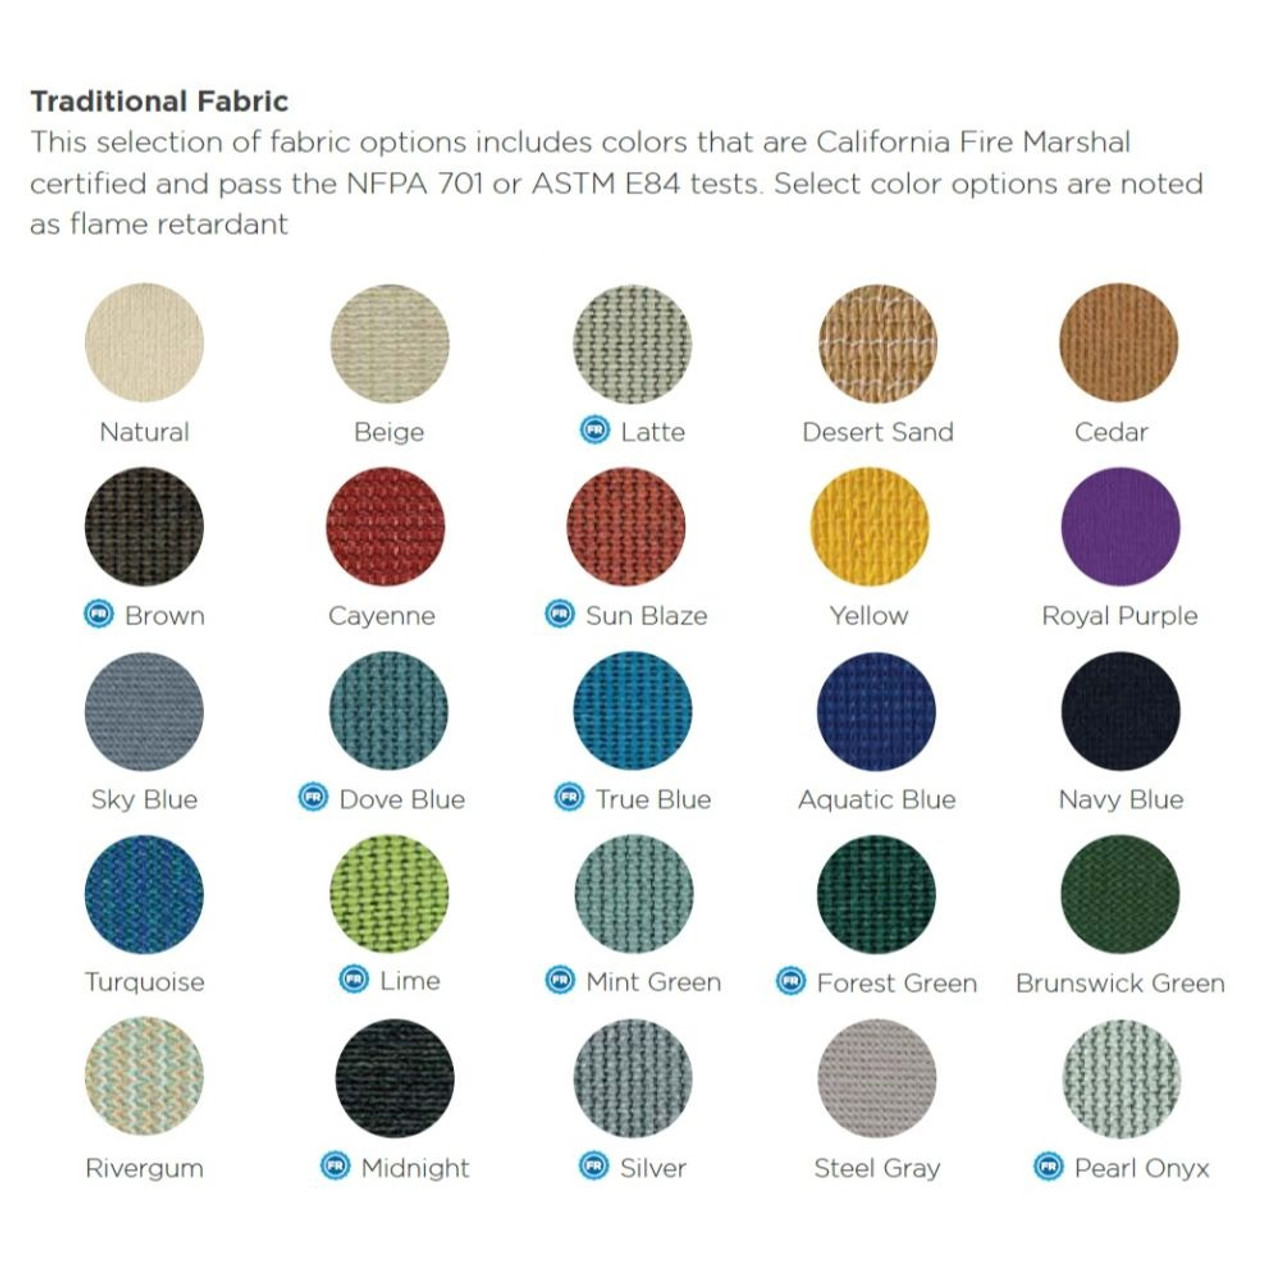 Fabric colors